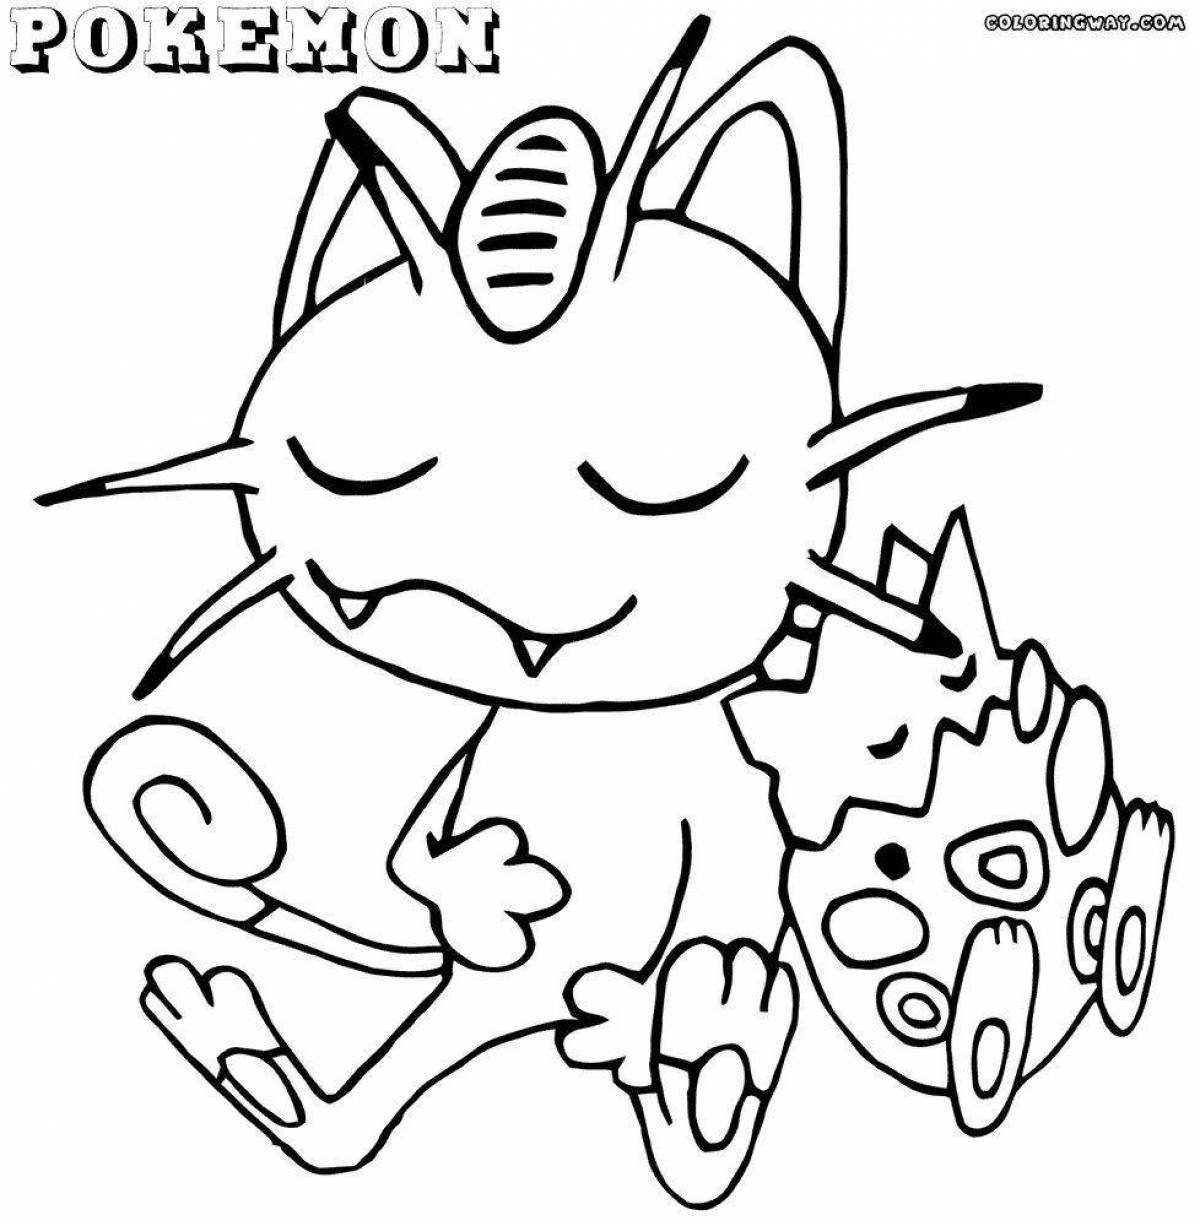 Gorgeous meowth coloring page